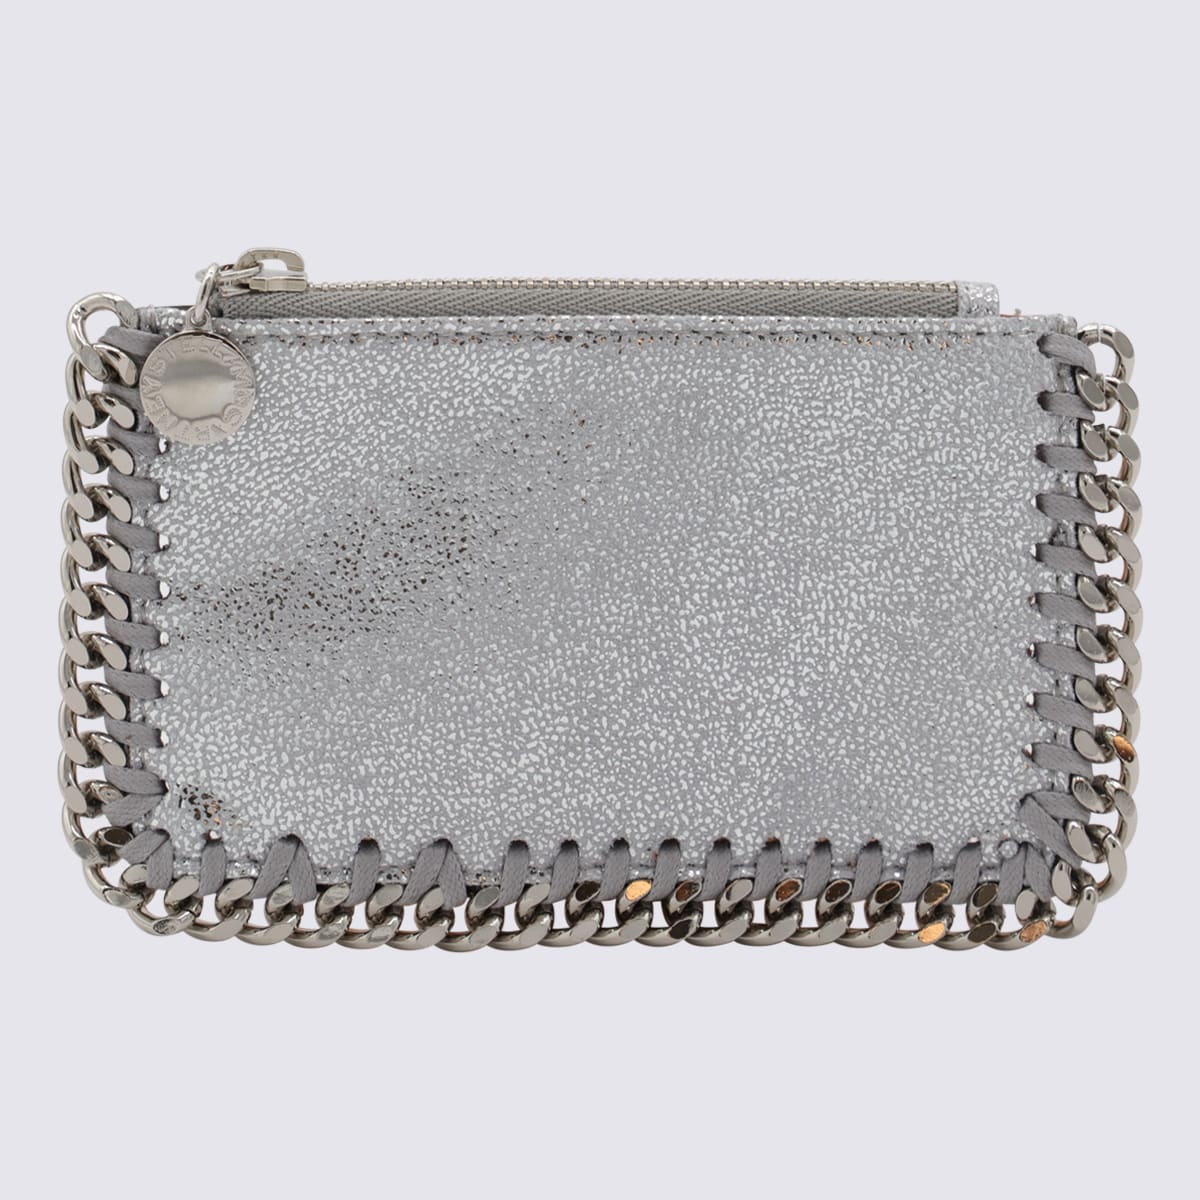 Silver Metal Faux Leather Falabella Card Holder